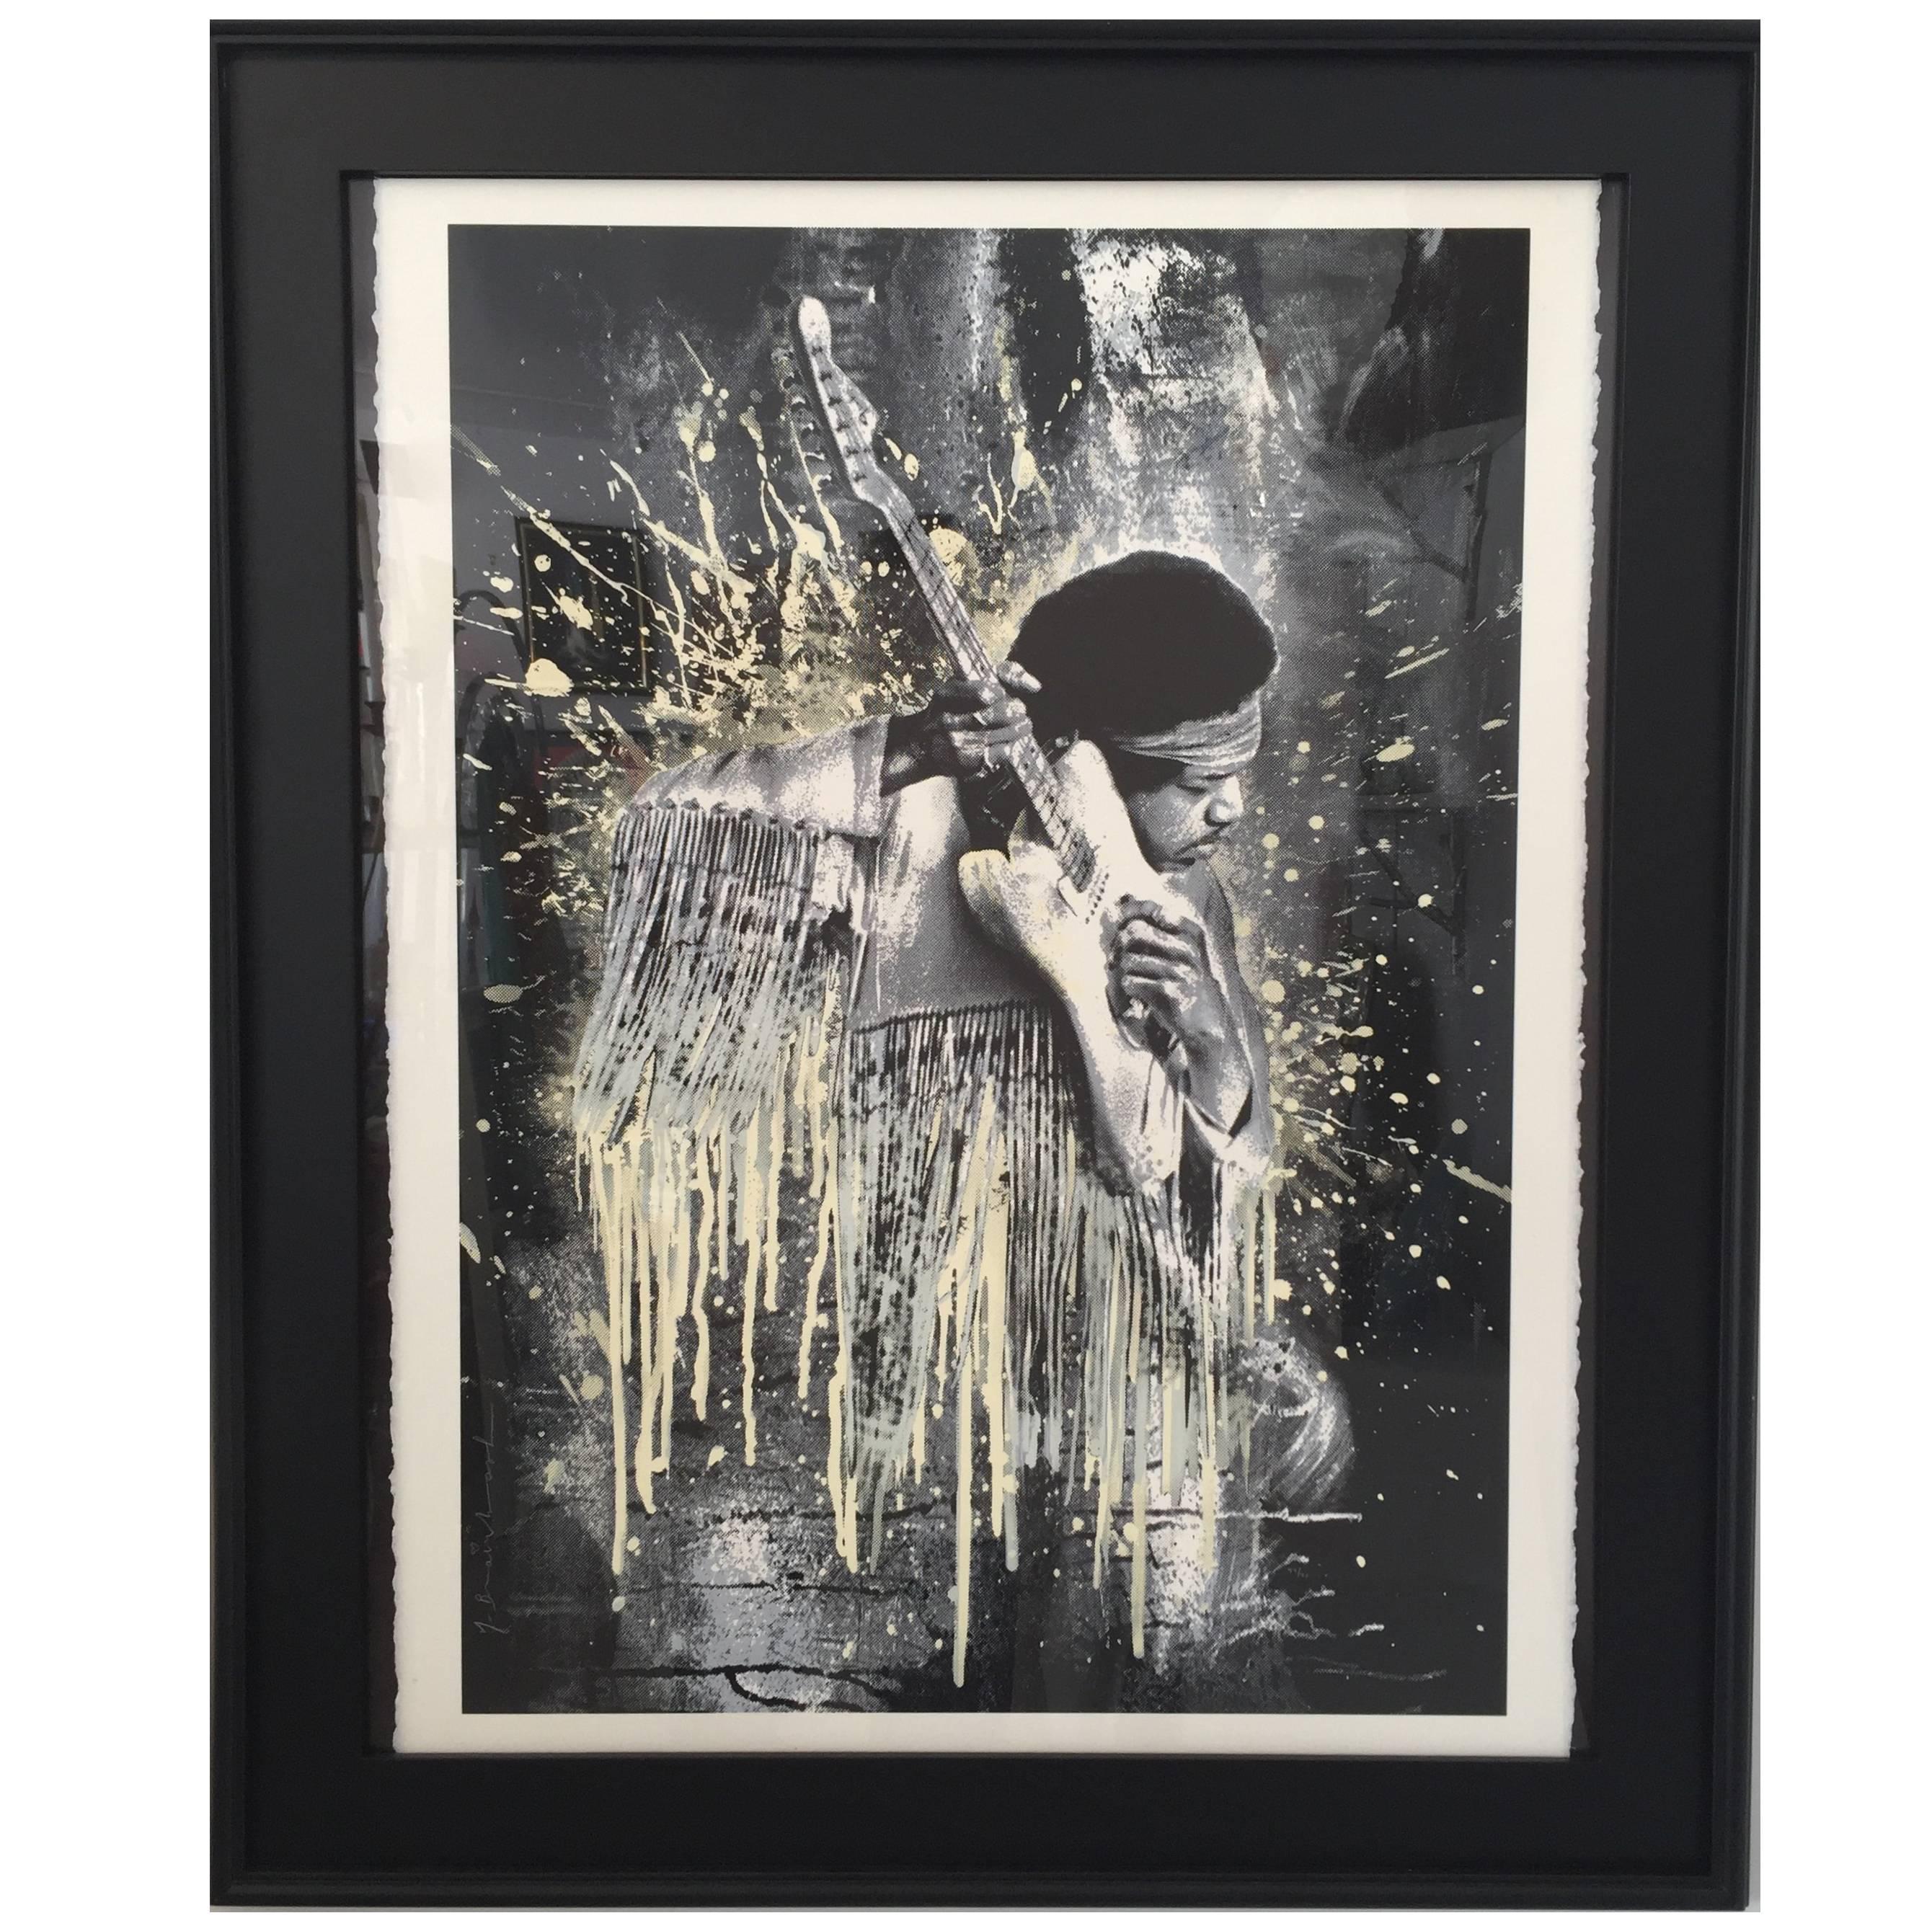 Jimi Hendrix Lithograph Framed by, "Mr. Brainwash", Signed & Numbered